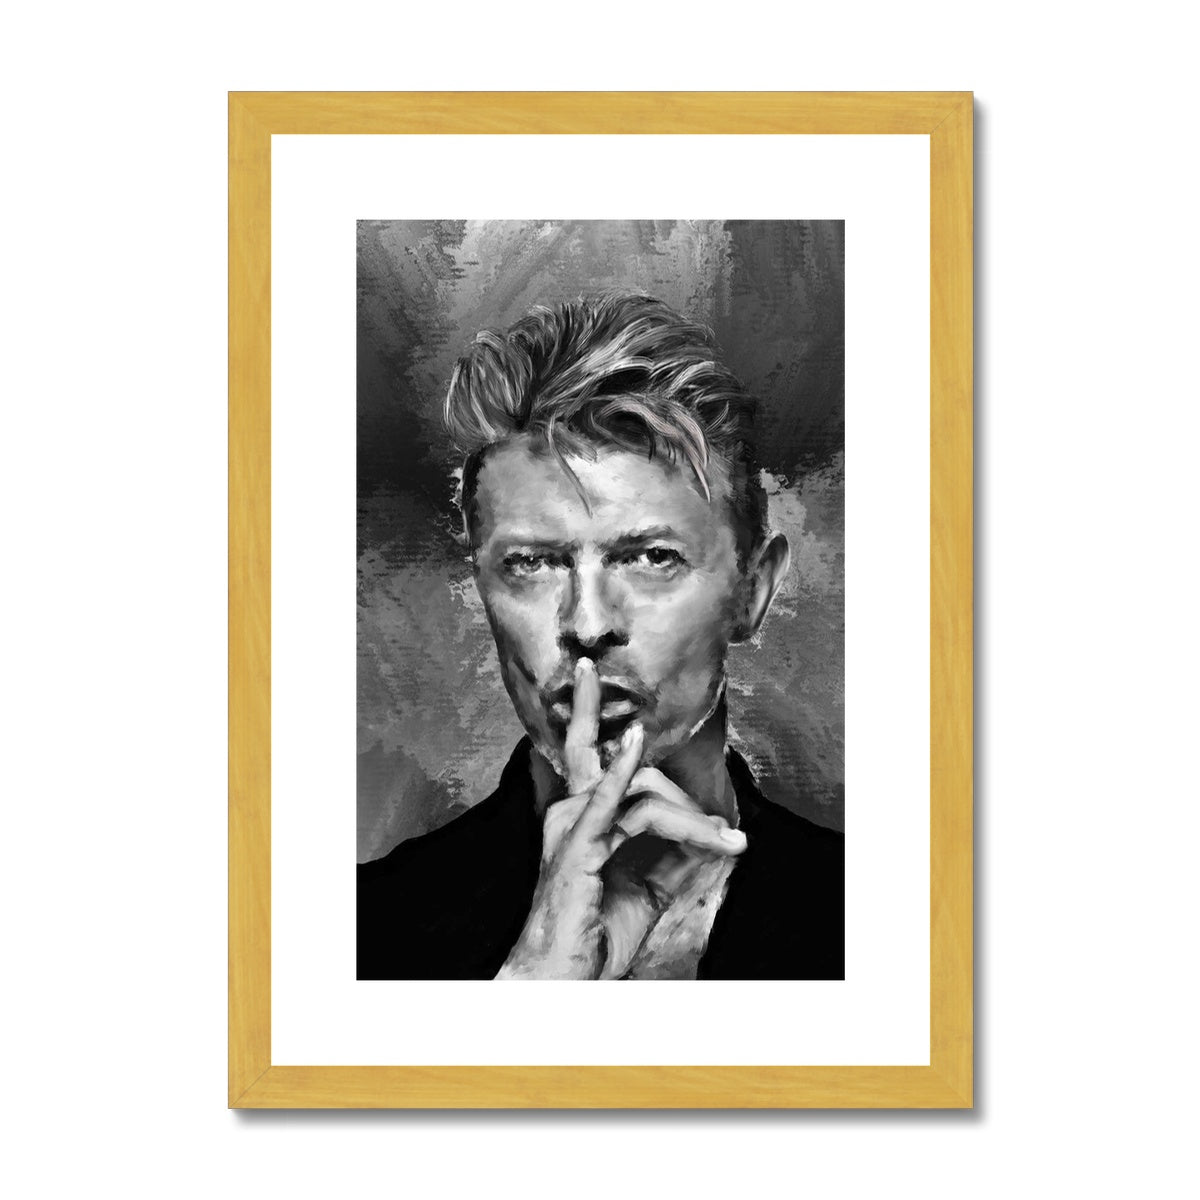 Bowie 'Shhh!' Painting Antique Framed & Mounted Print